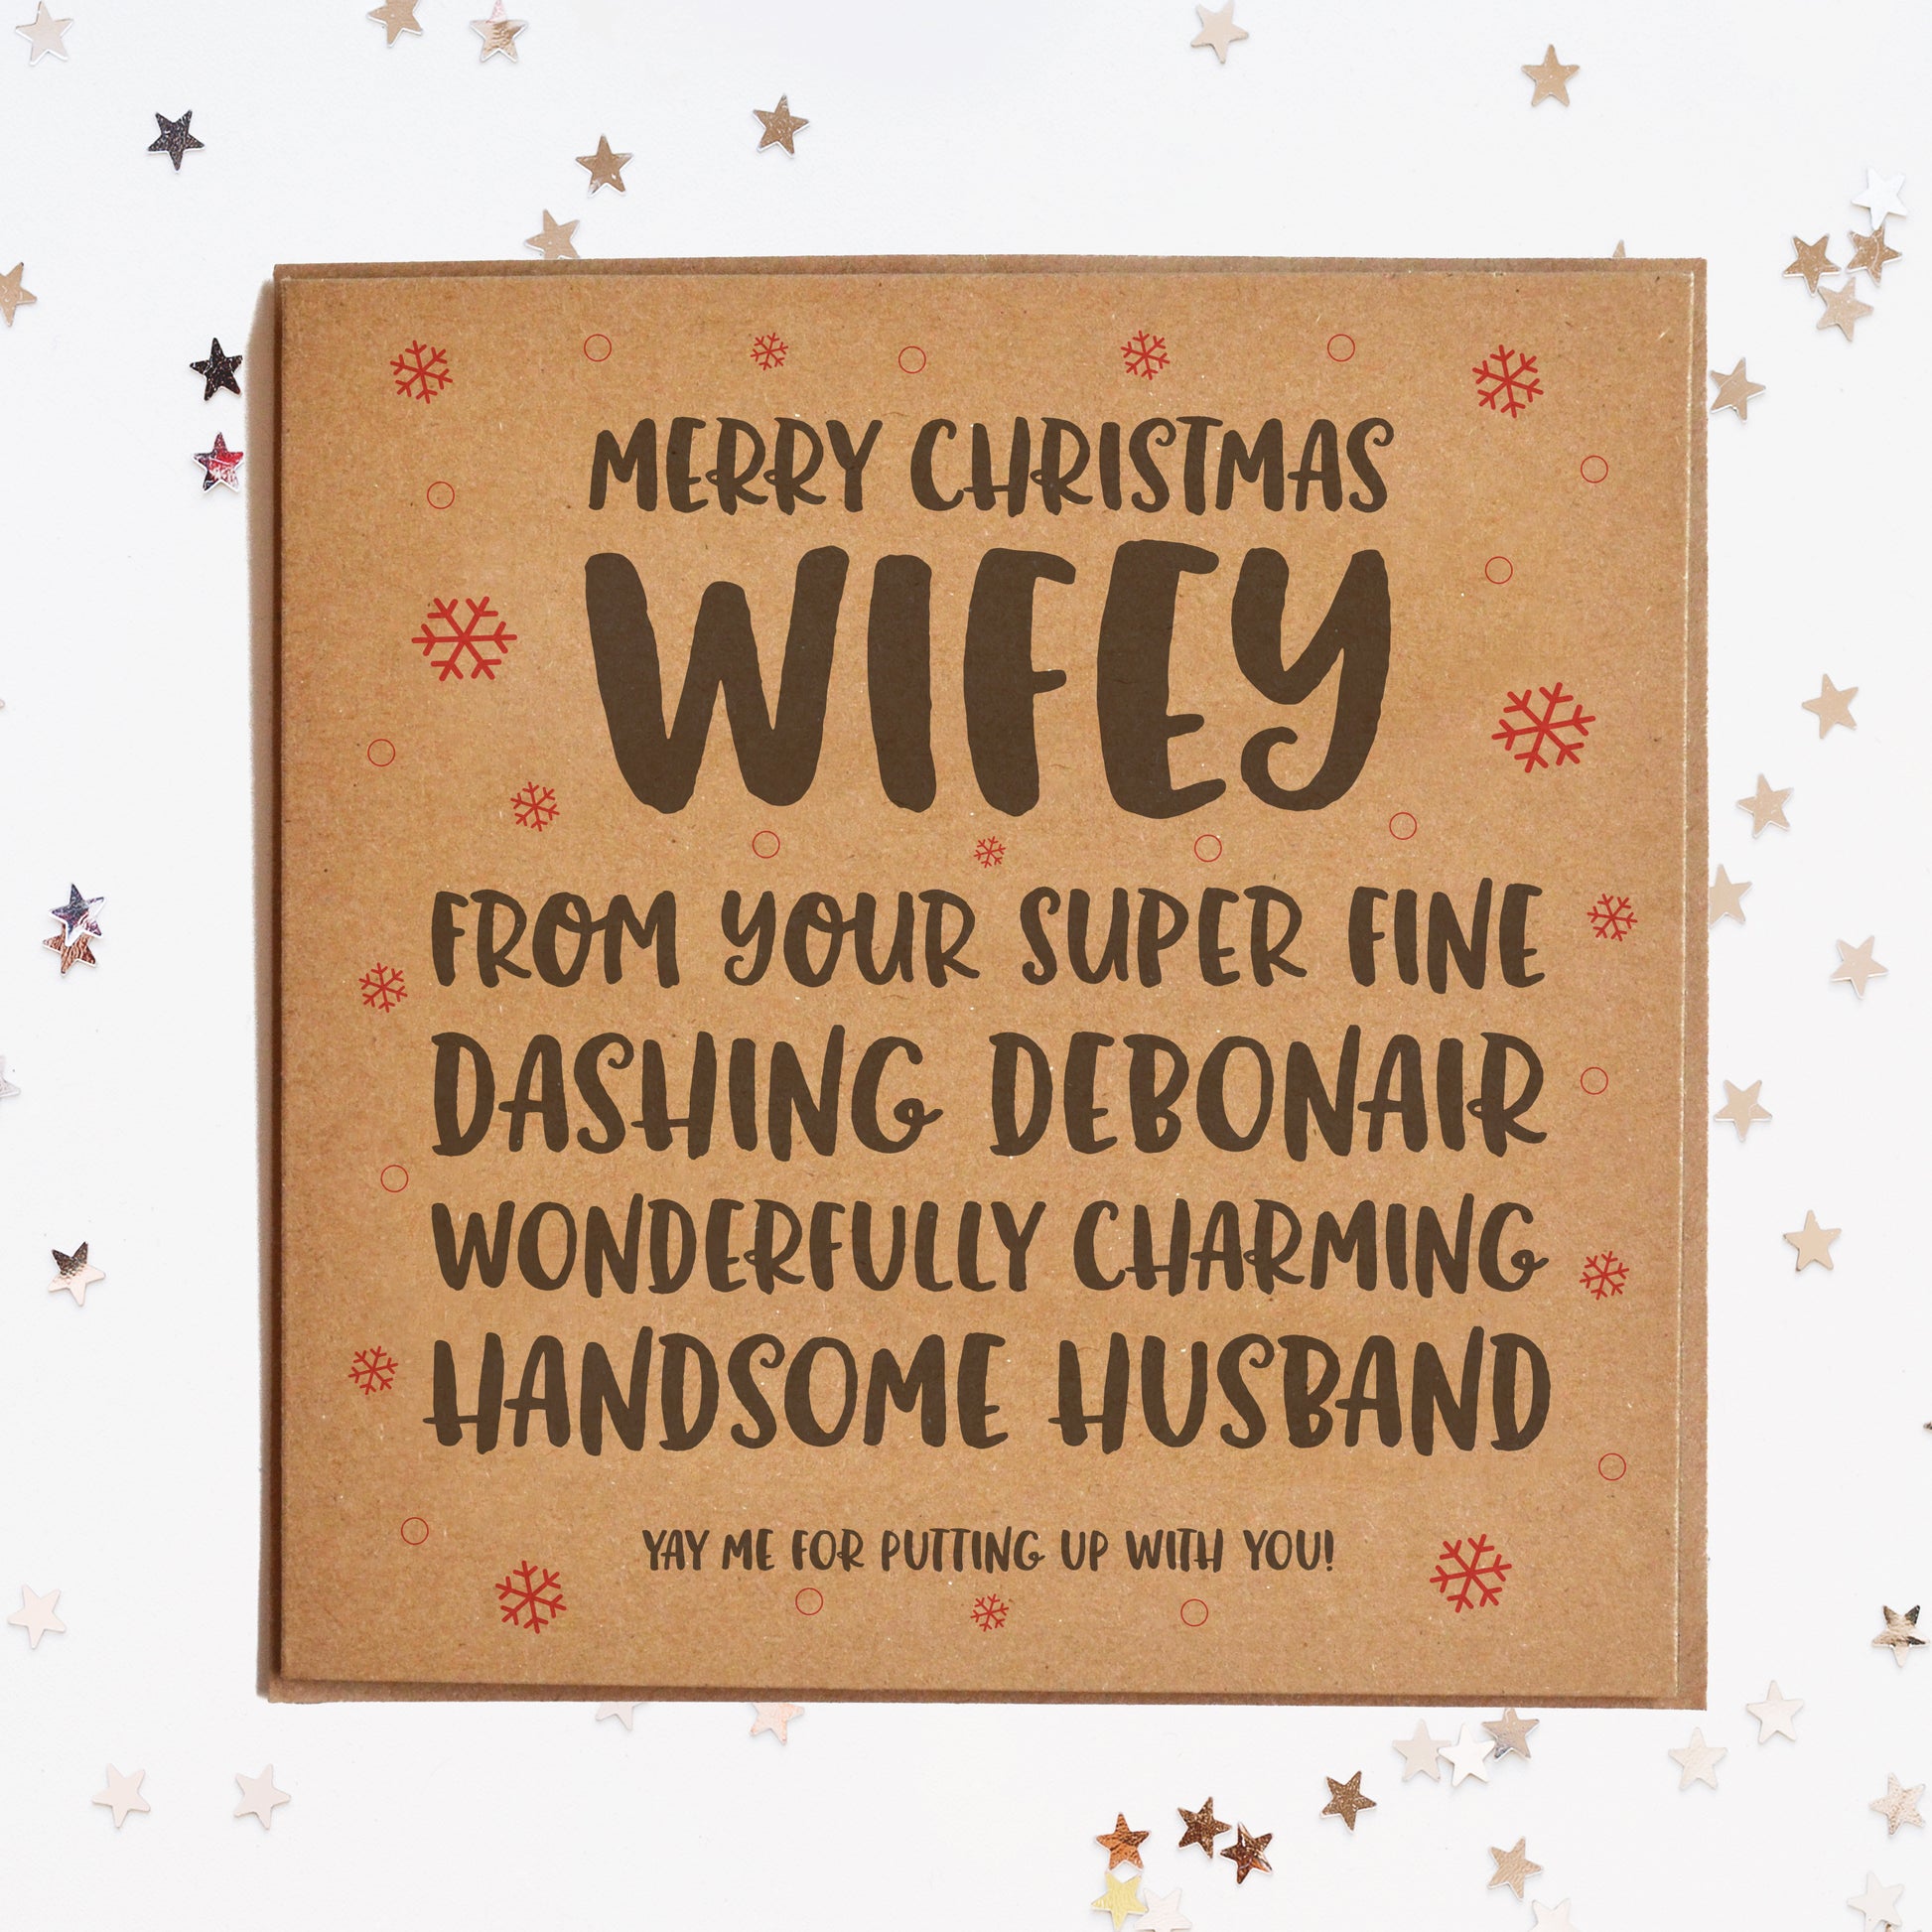 A funny Christmas card for the wife, in festive colours and a message saying "MERRY CHRISTMAS WIFEY! FROM YOU FINE, DASHING DEBONAIR, WONDERFULLY CHARMING HANDSOME HUSBAND! YAY ME FOR PUTTING UP WITH YOU!"